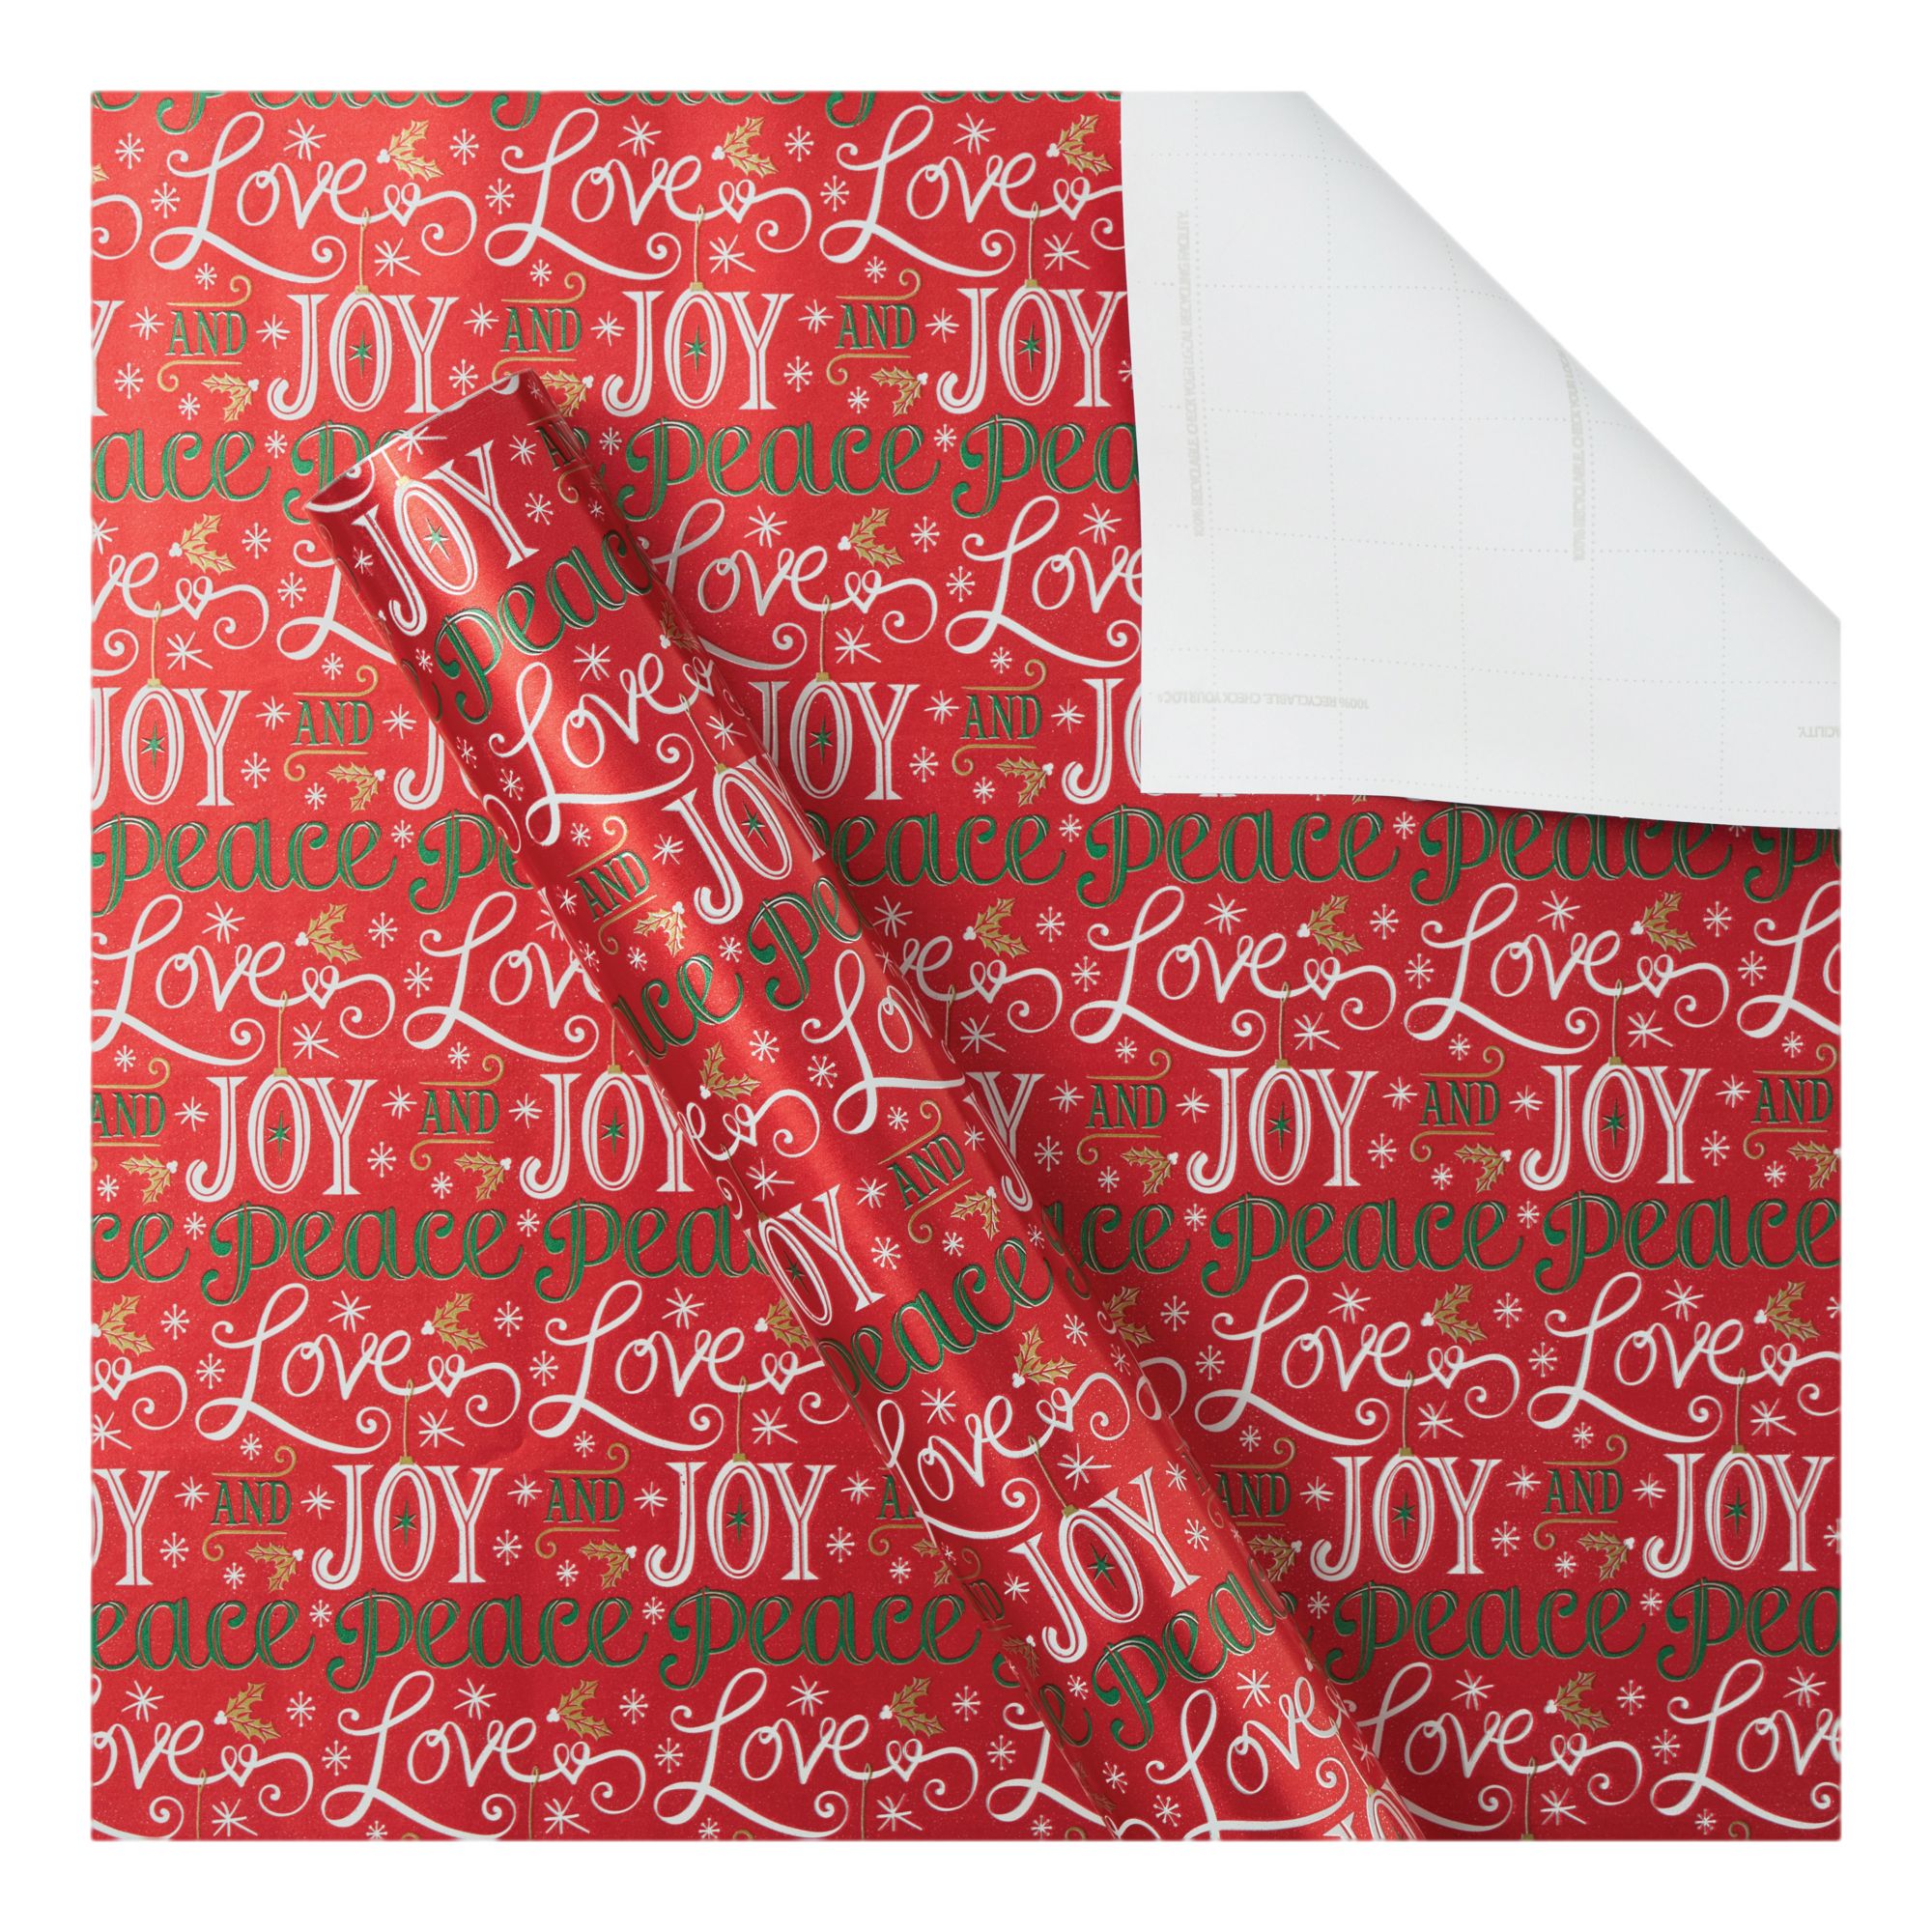 Get 100 Sq Ft Holographic Merry Christmas Wrapping Paper Set - 4